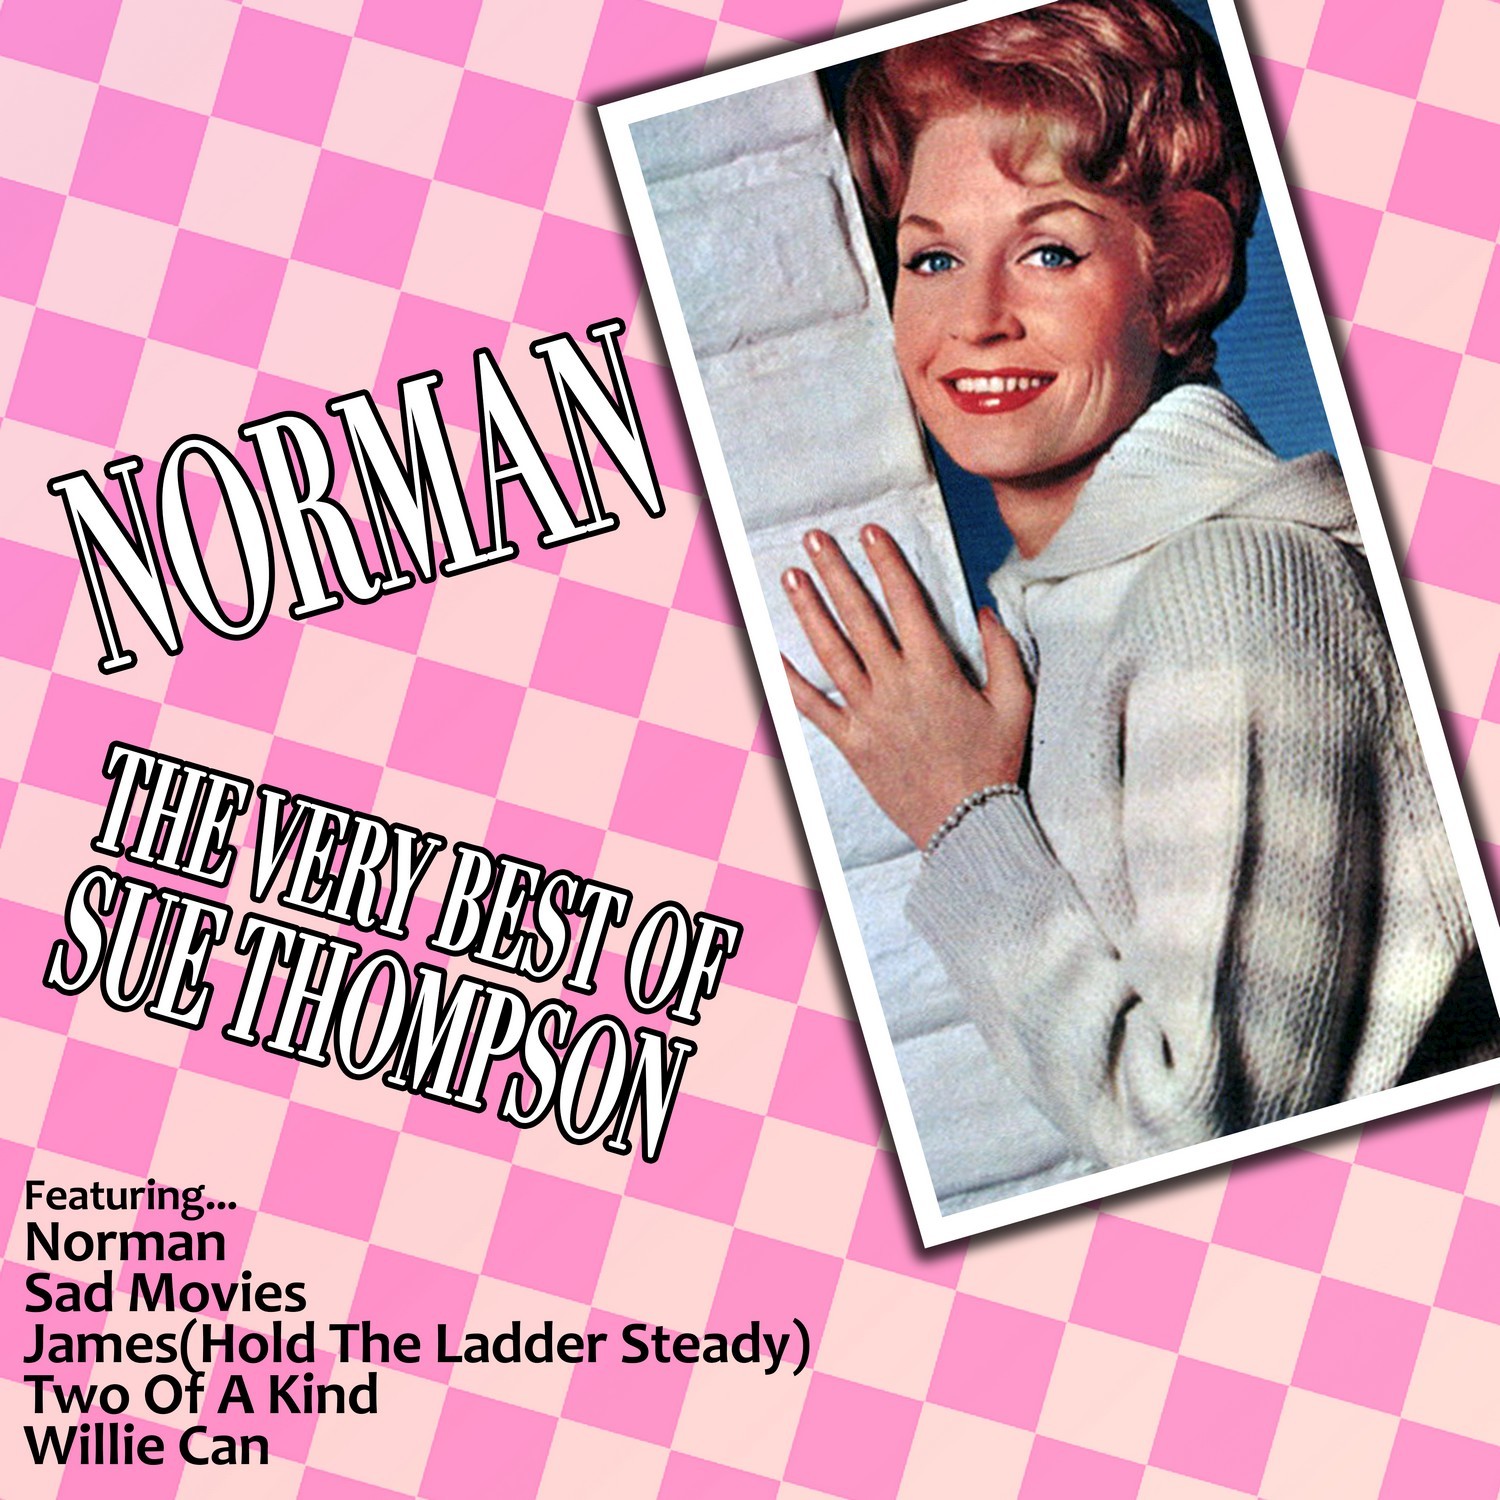 Norman: The Very Best of Sue Thompson